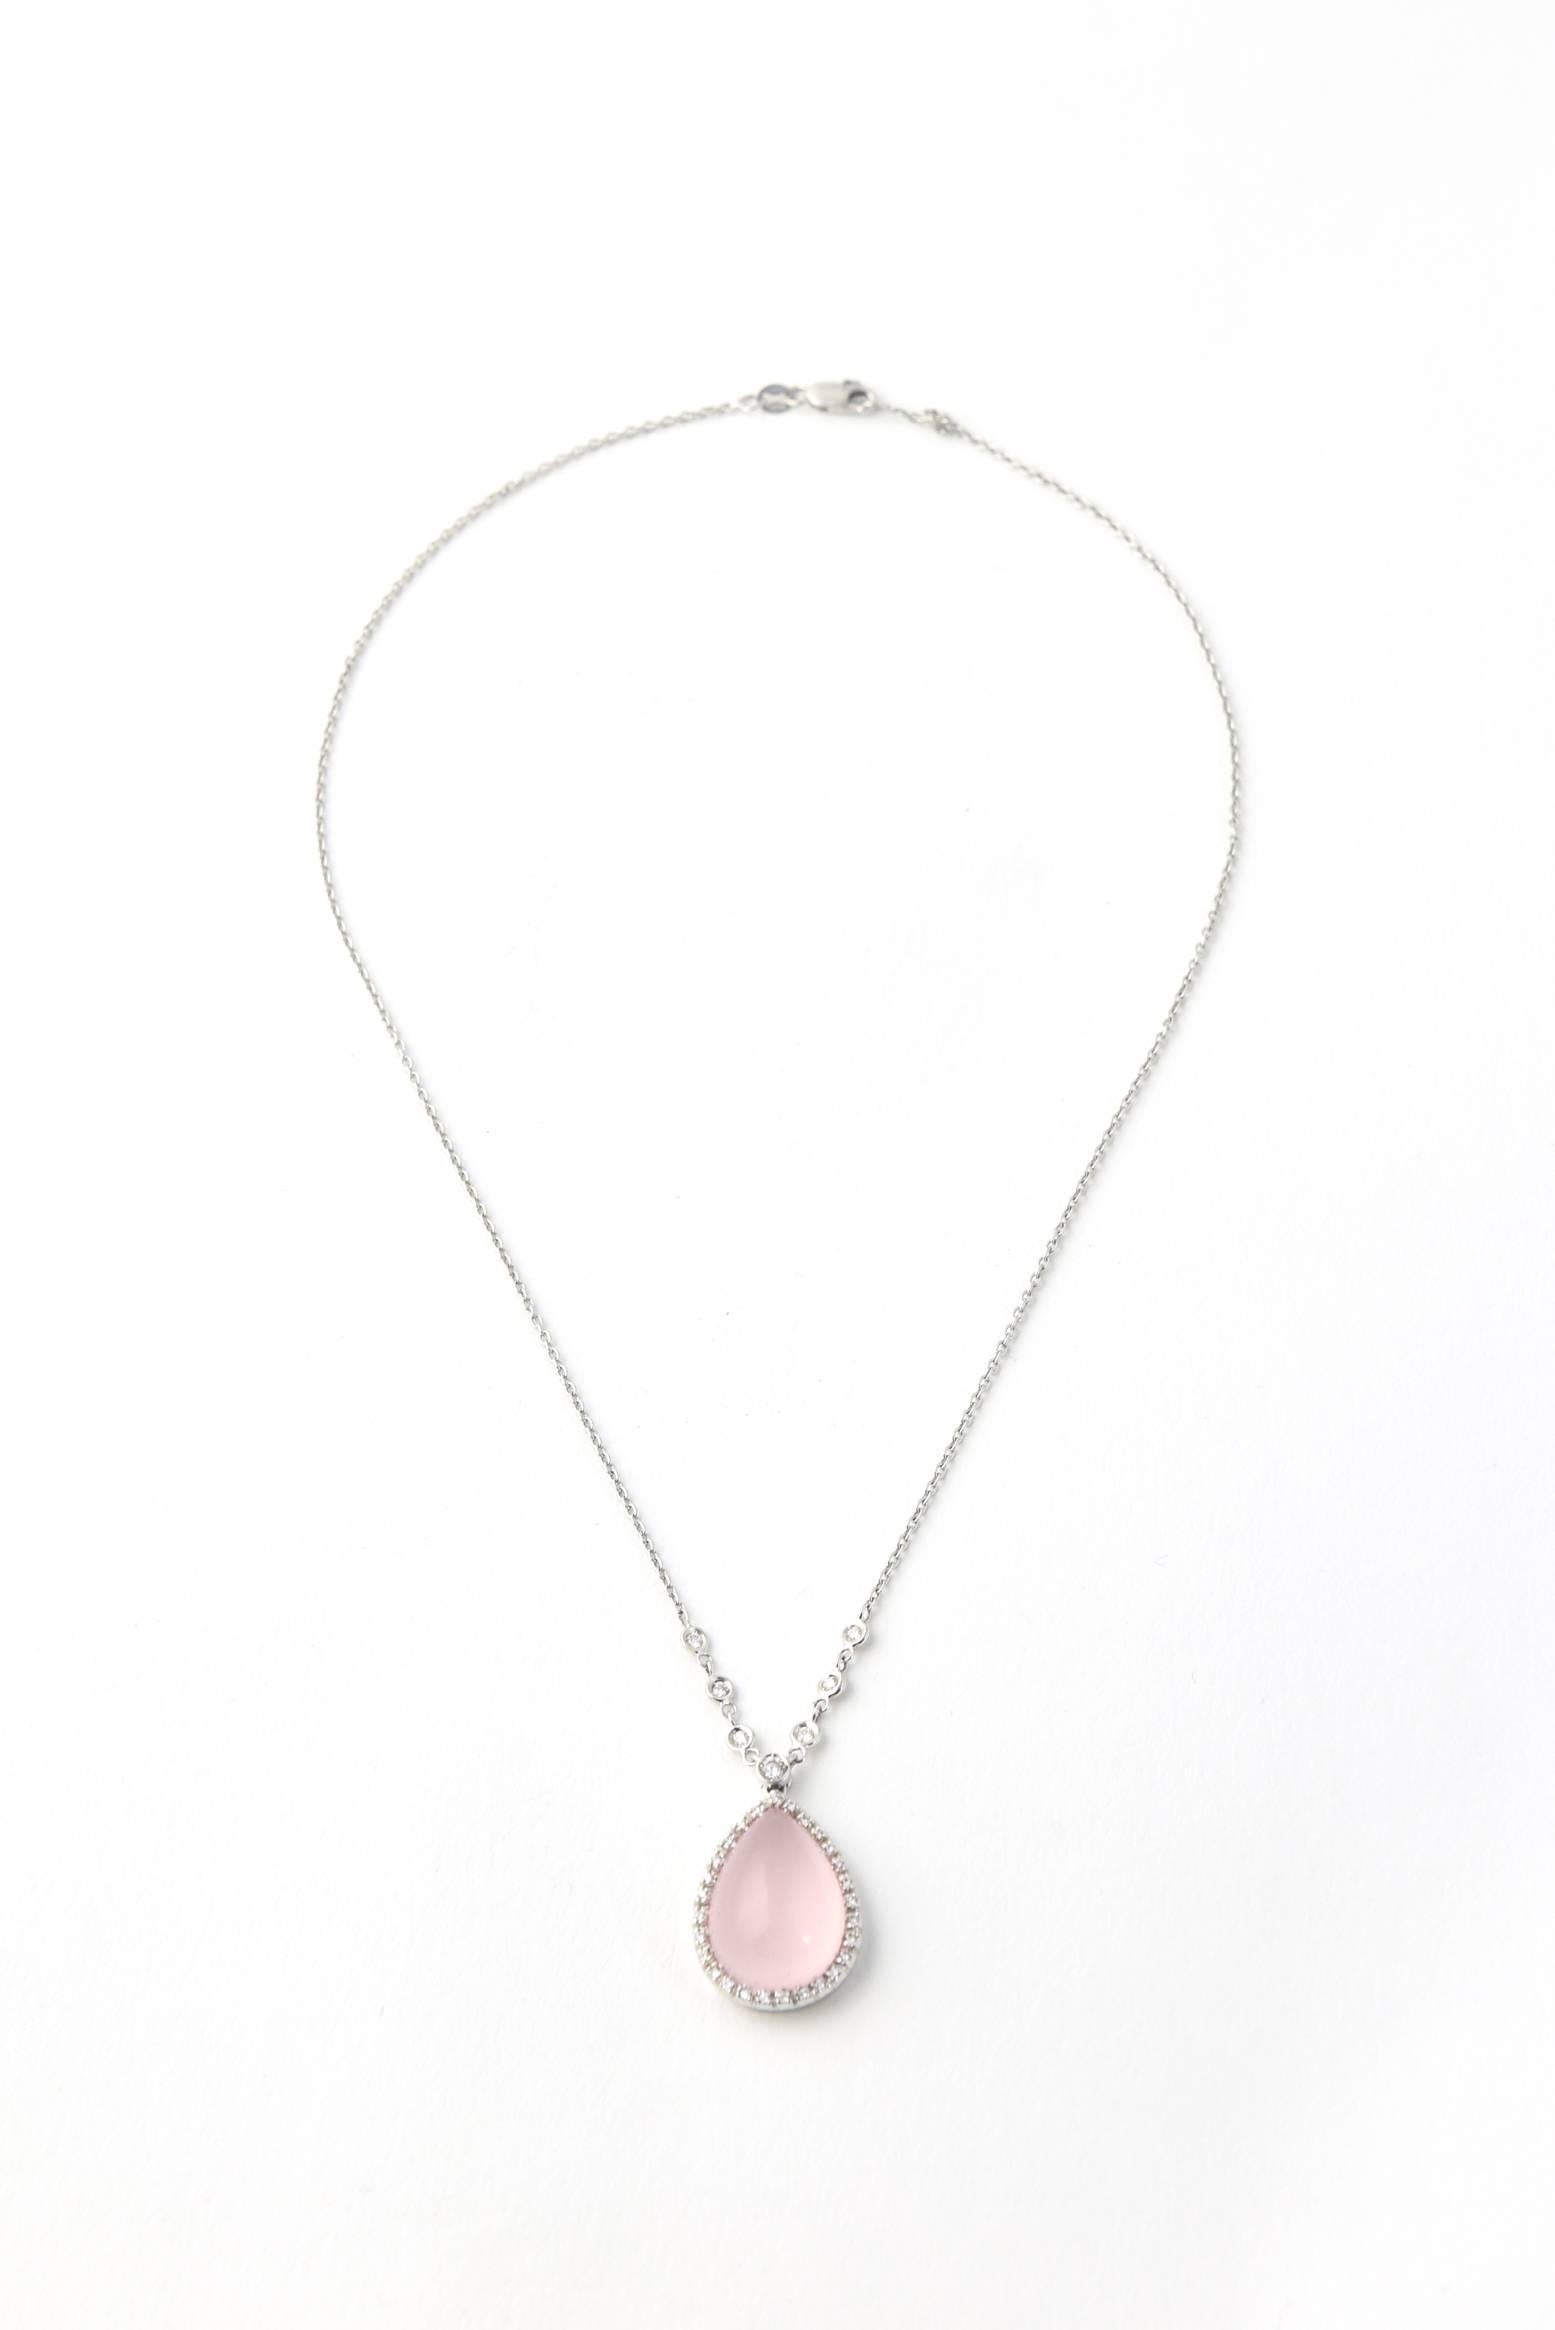 Favero Rose Quartz & Diamond Necklace crafted from 18K white gold, featuring a teardrop shape rose quartz cabochon set within a bezel of diamonds hanging from a 18k white gold chain with bezeled diamond accents.   Lobster clasp.

Marked 18K a